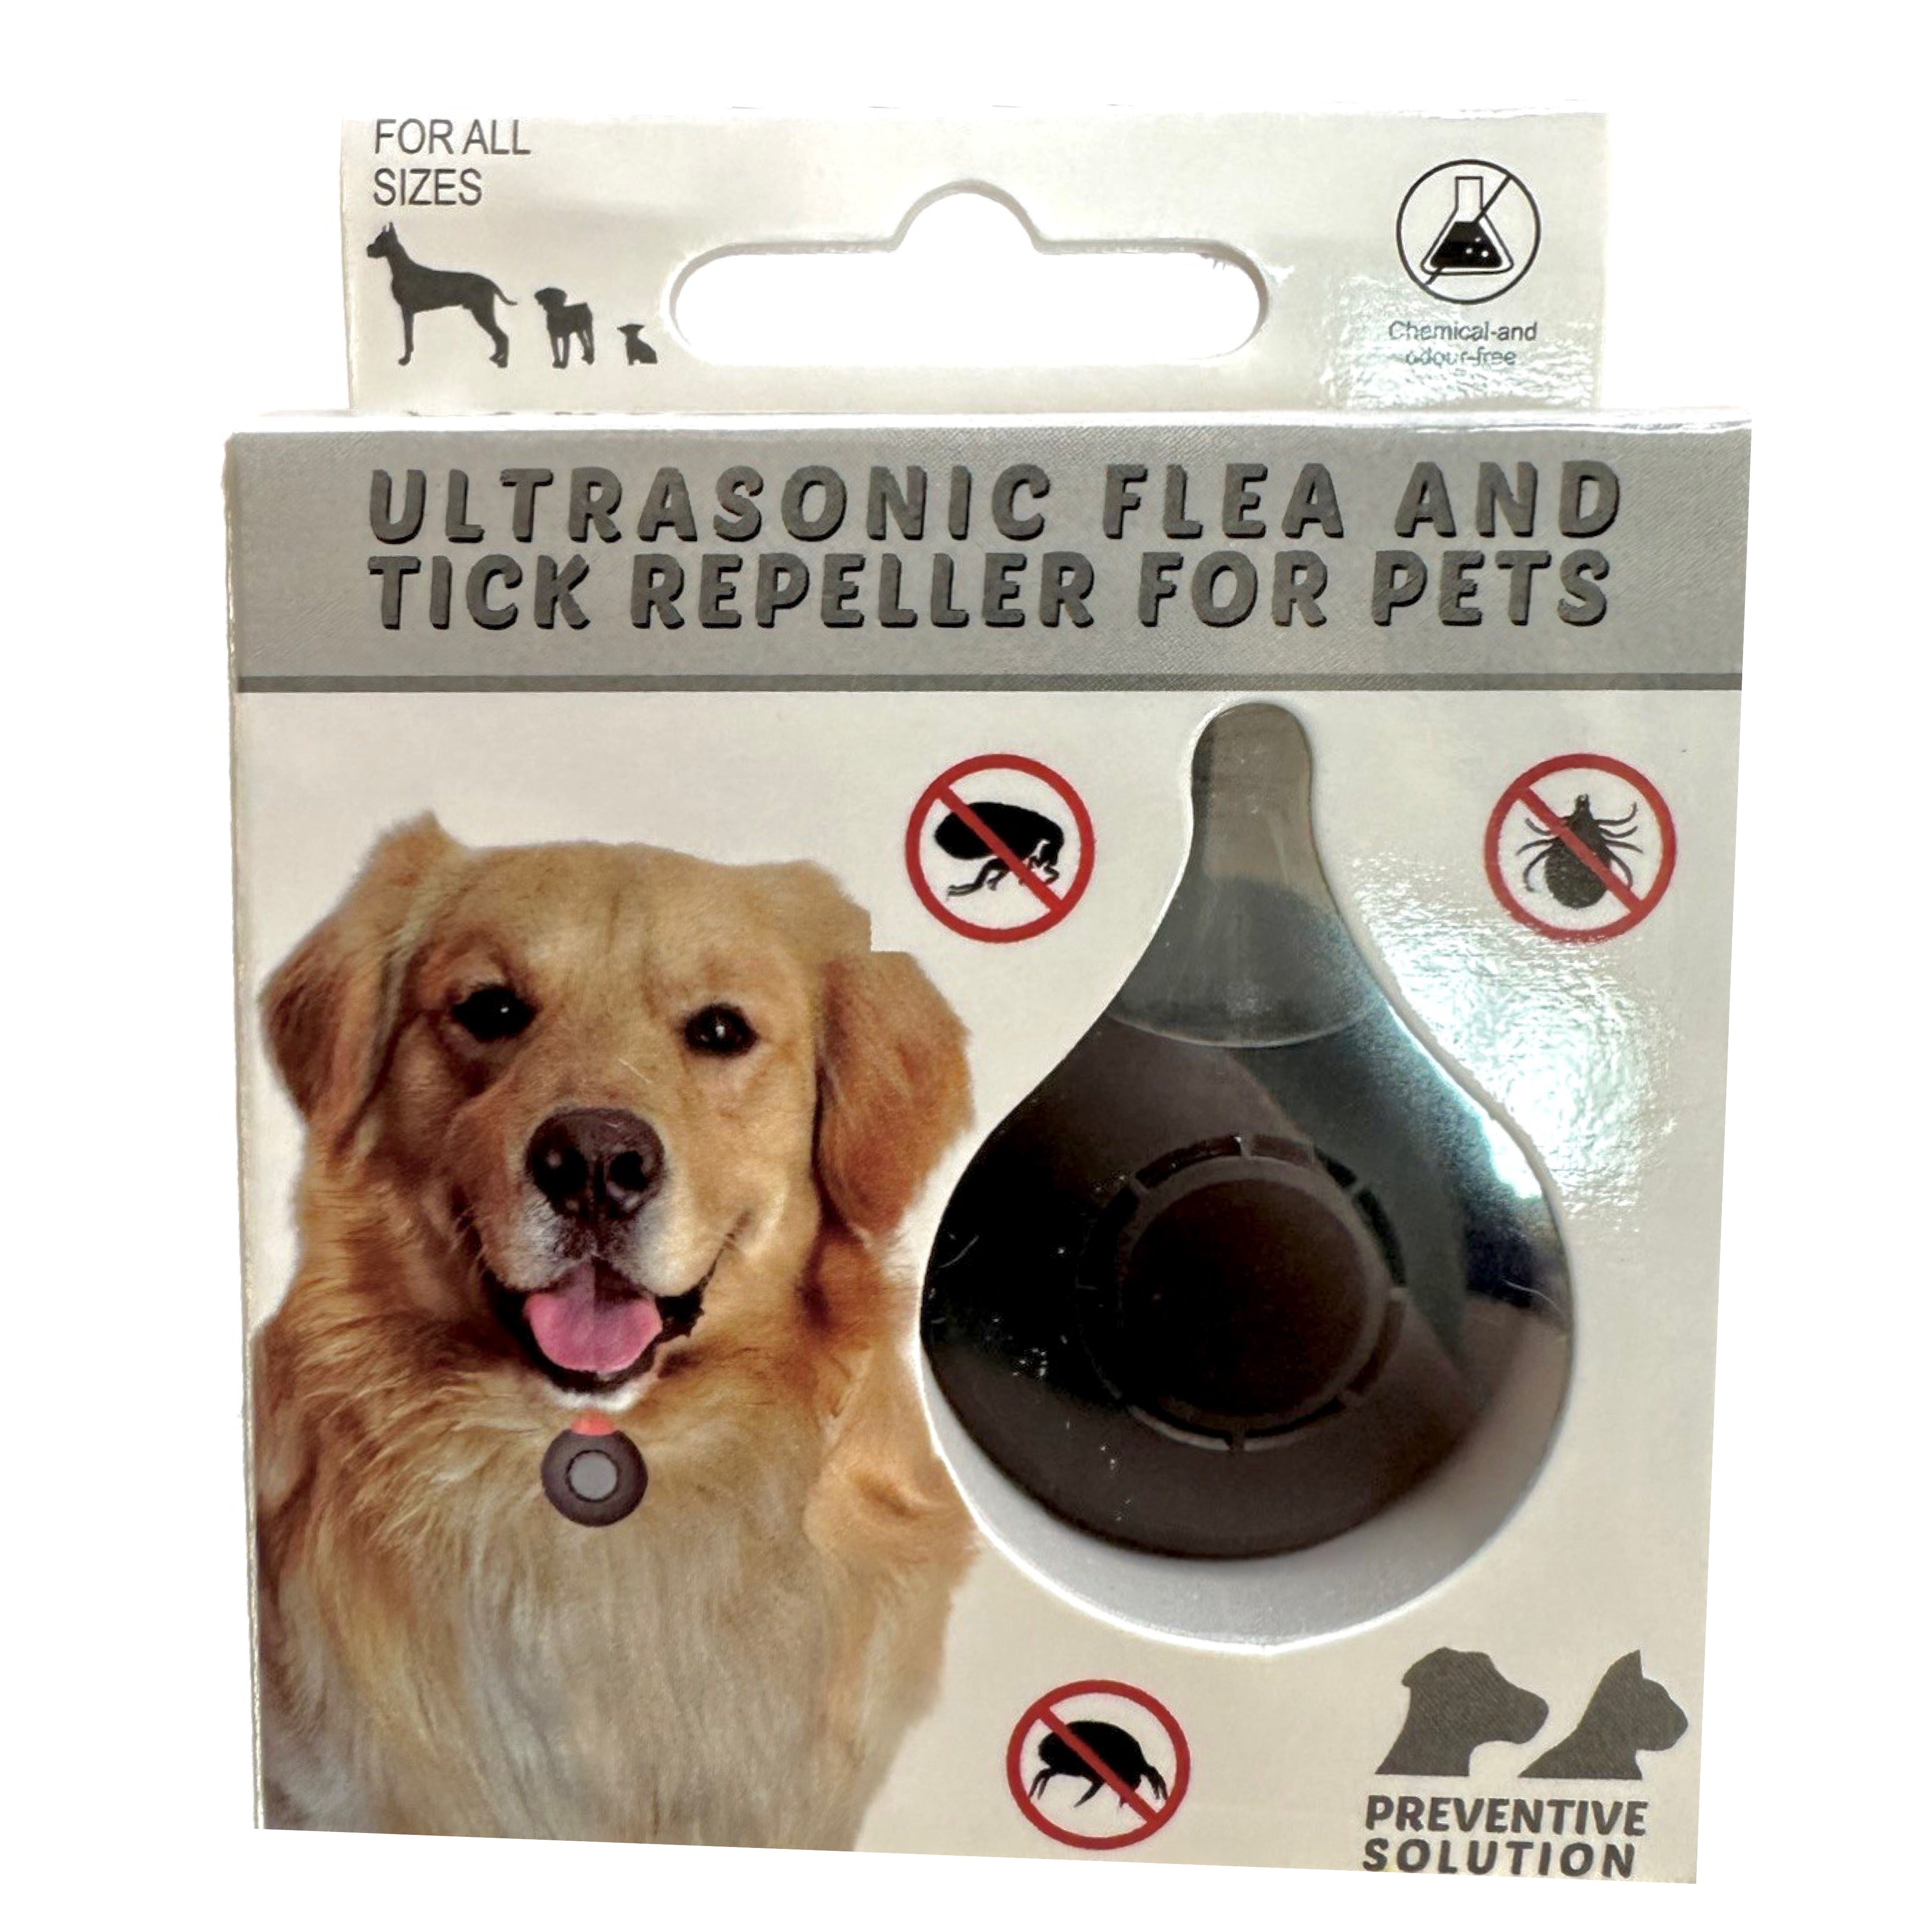 Ultrasonic Flea and Tick Repeller For Pets